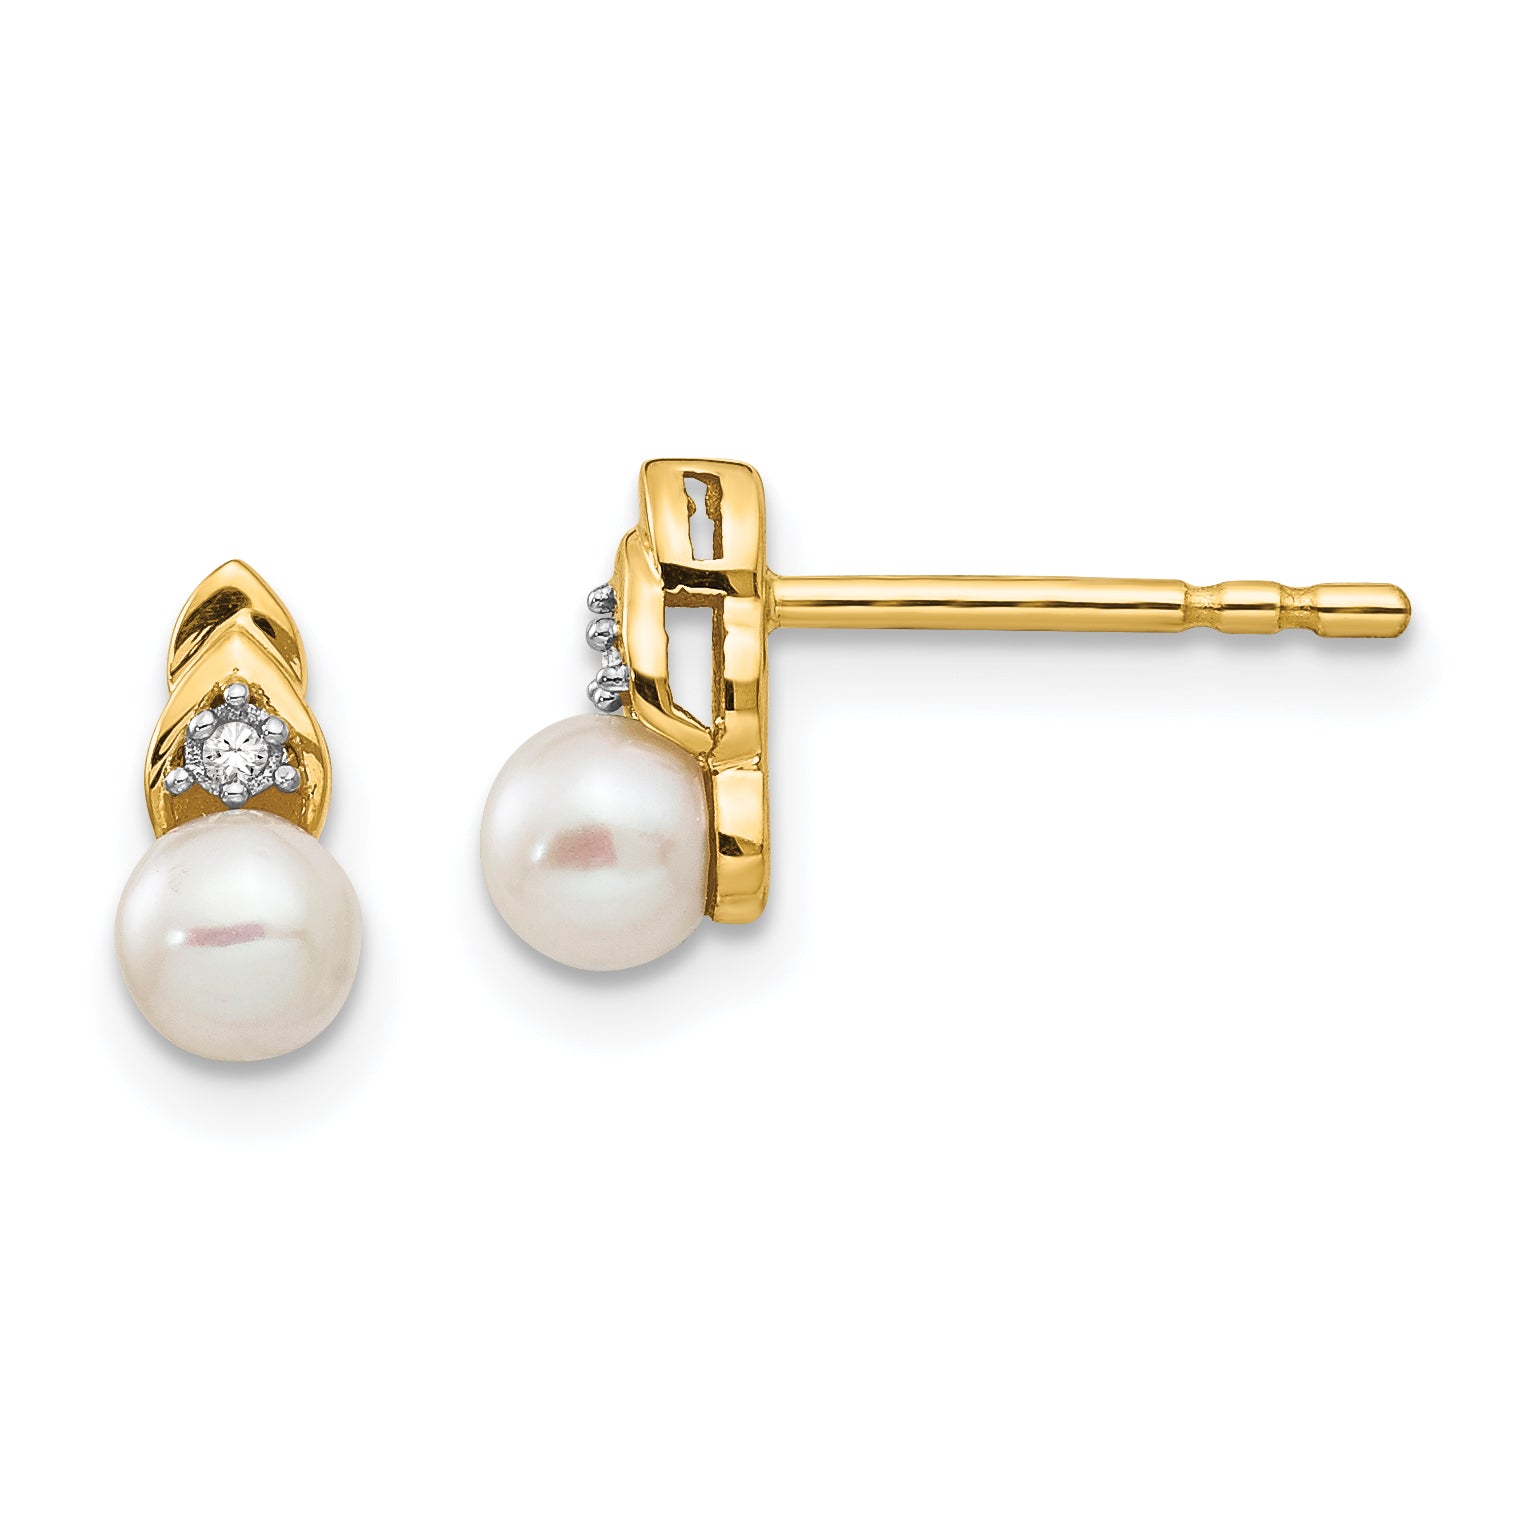 14k FW Cultured Pearl and Diamond Earrings